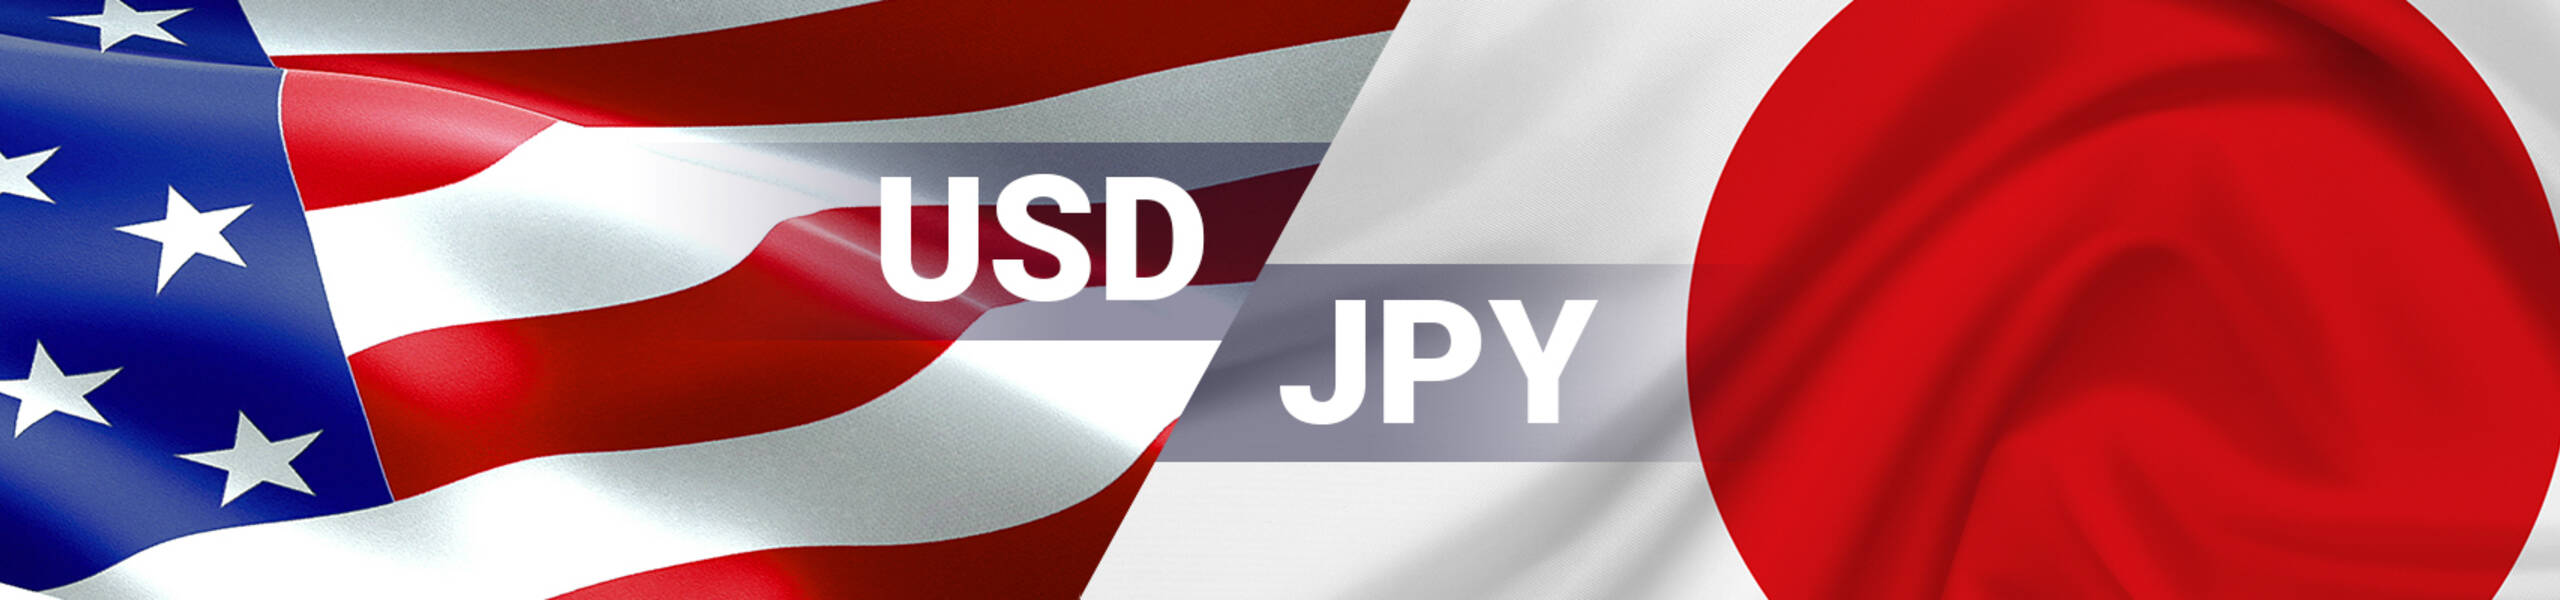 USD/JPY Dailyレポート 2018/02/14